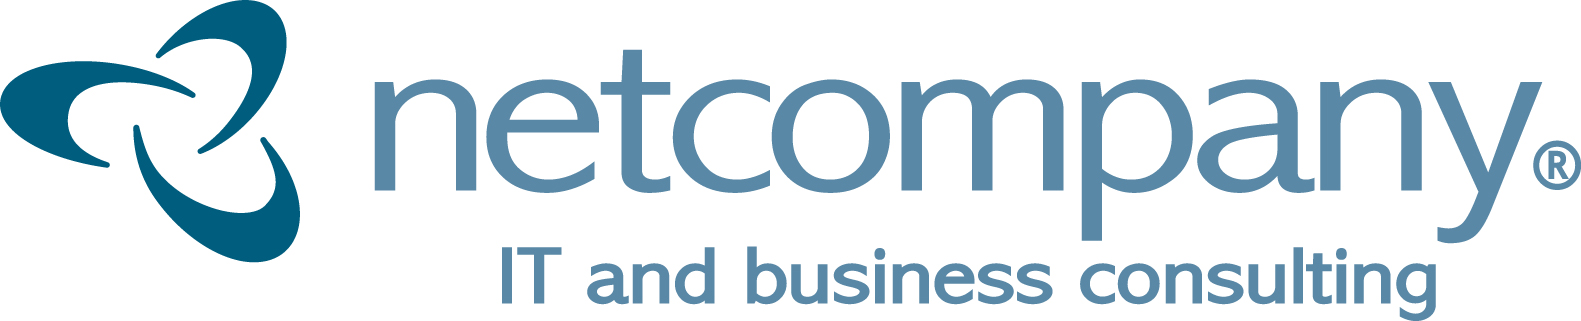 Netcompany logo, IT and business consulting